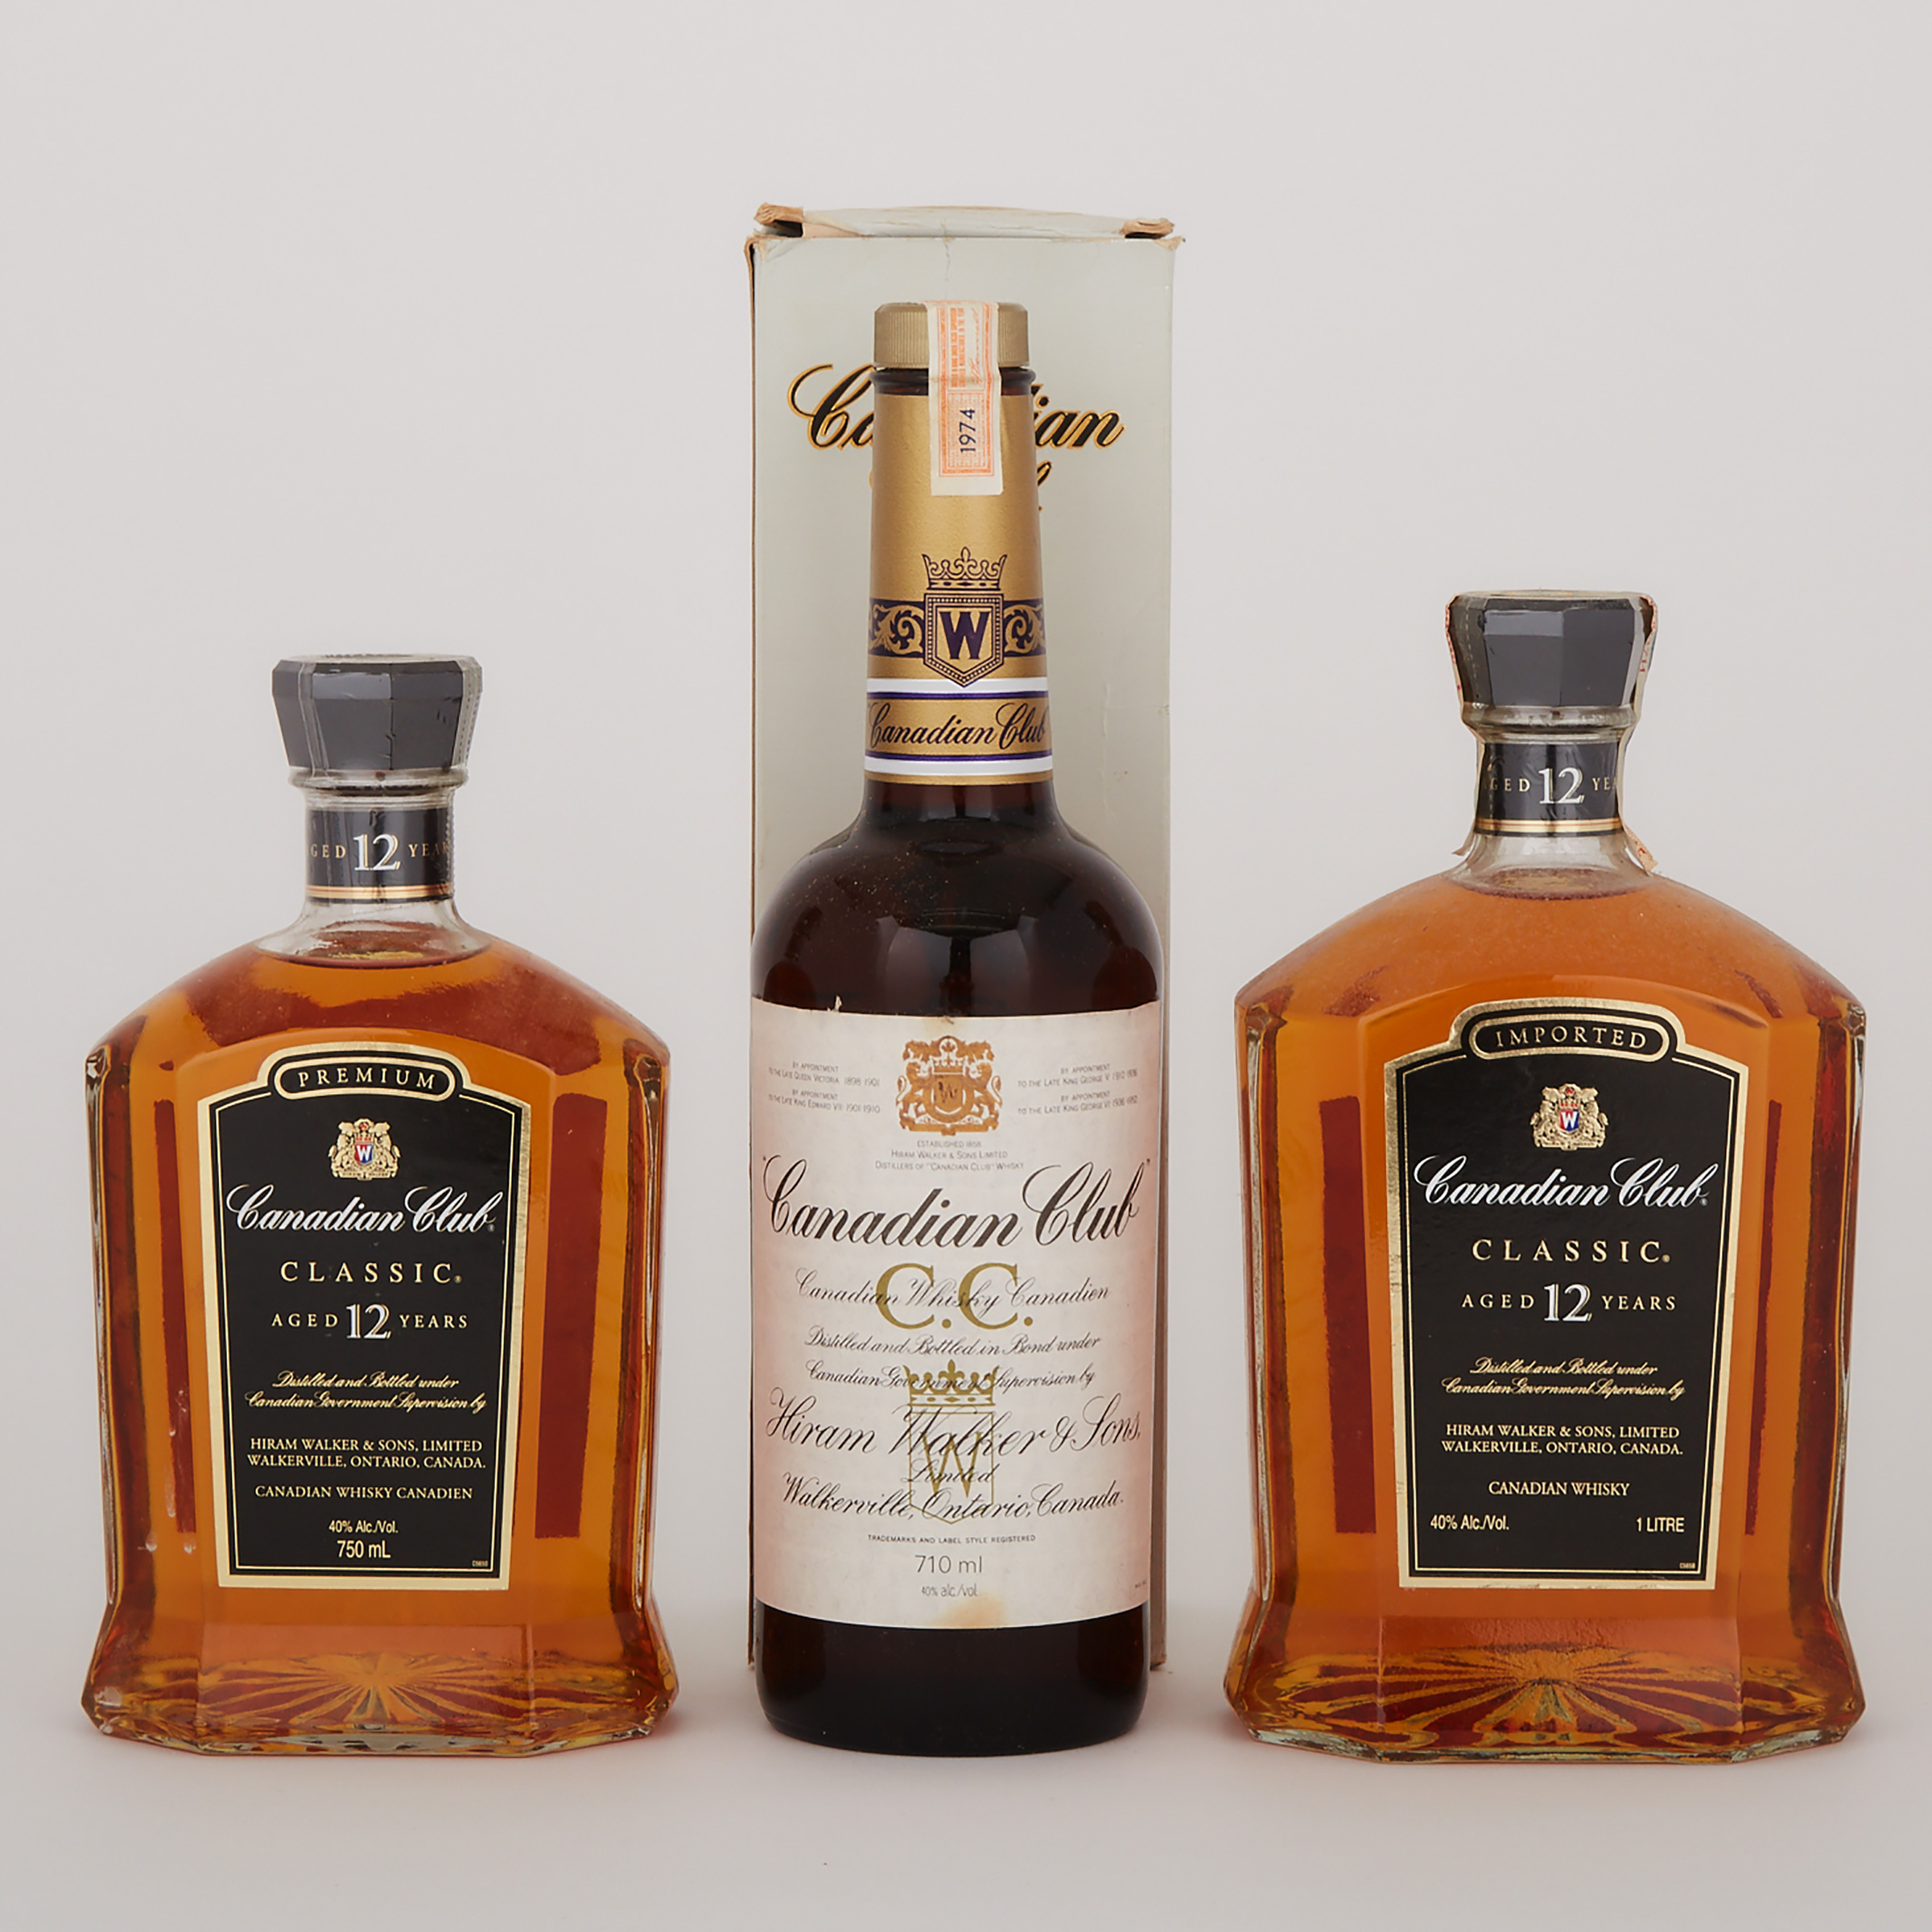 CANADIAN CLUB CANADIAN WHISKY (ONE 710 ML)
CANADIAN CLUB PREMIUM CANADIAN WHISKY 12 YEARS (ONE 1000 ML)
CANADIAN CLUB PREMIUM CLASSIC CANADIAN WHISKY 12 YEARS (ONE 750 ML)